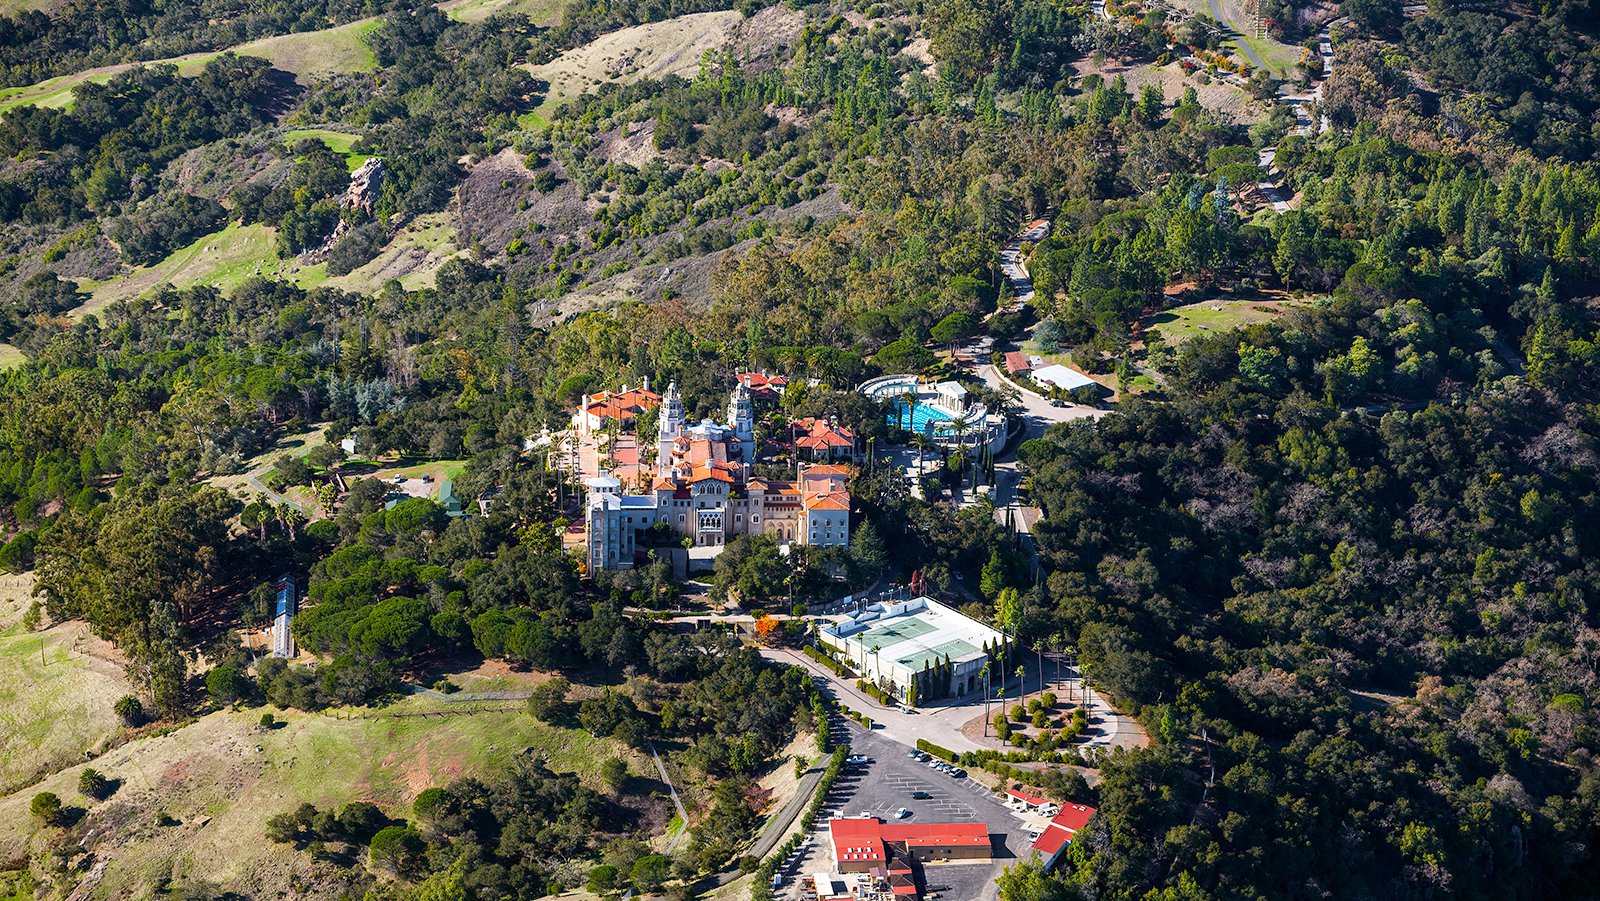 An aerial photograph of Hearst Castle showcases the grandiose and magnificent estate, located on a hilltop overlooking the Pacific Ocean in San Simeon, California